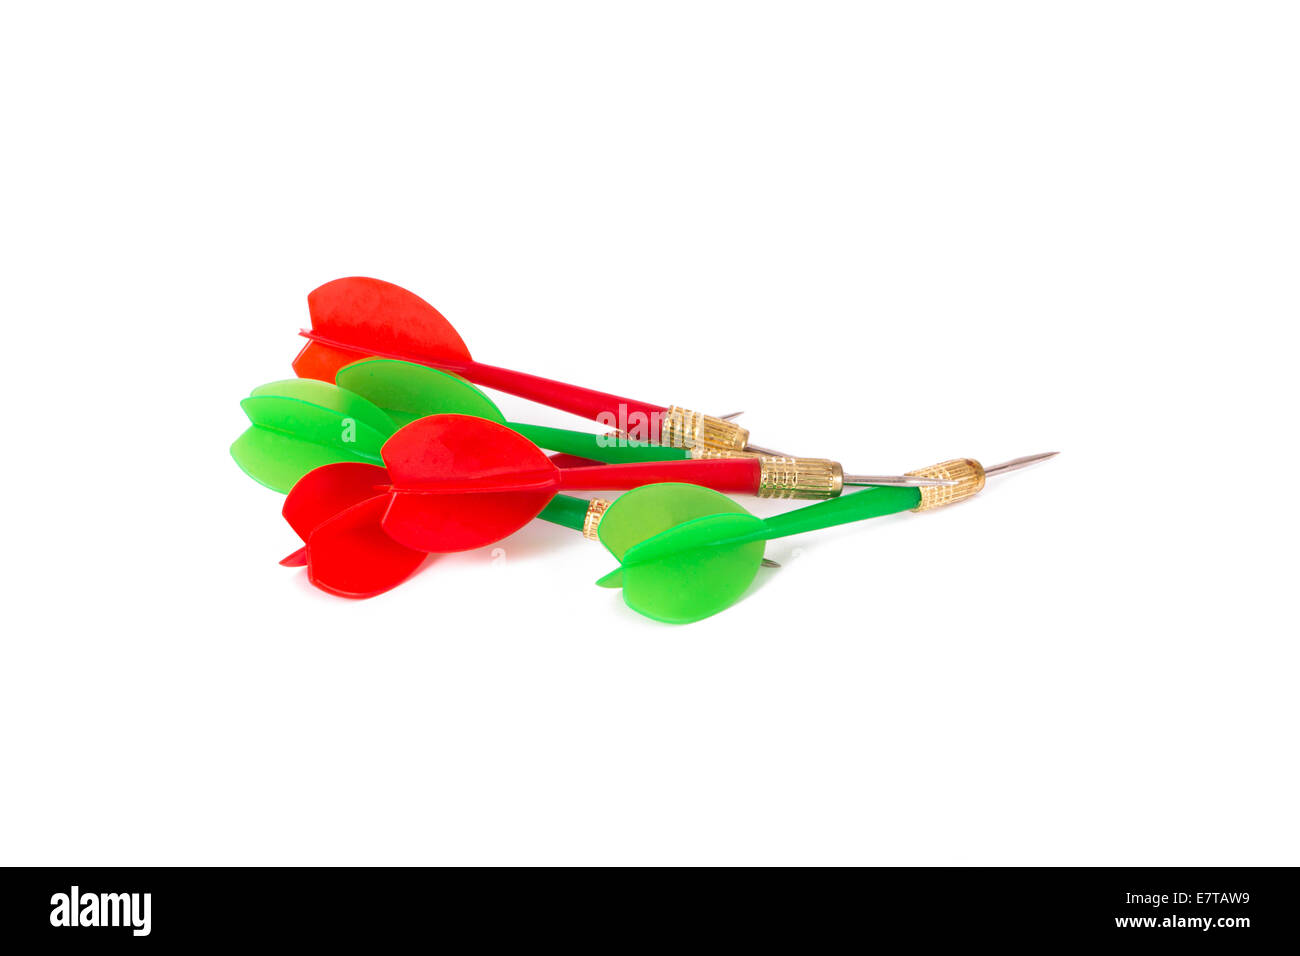 Plastic, green and red dart arrows, isolated on white background. Stock Photo